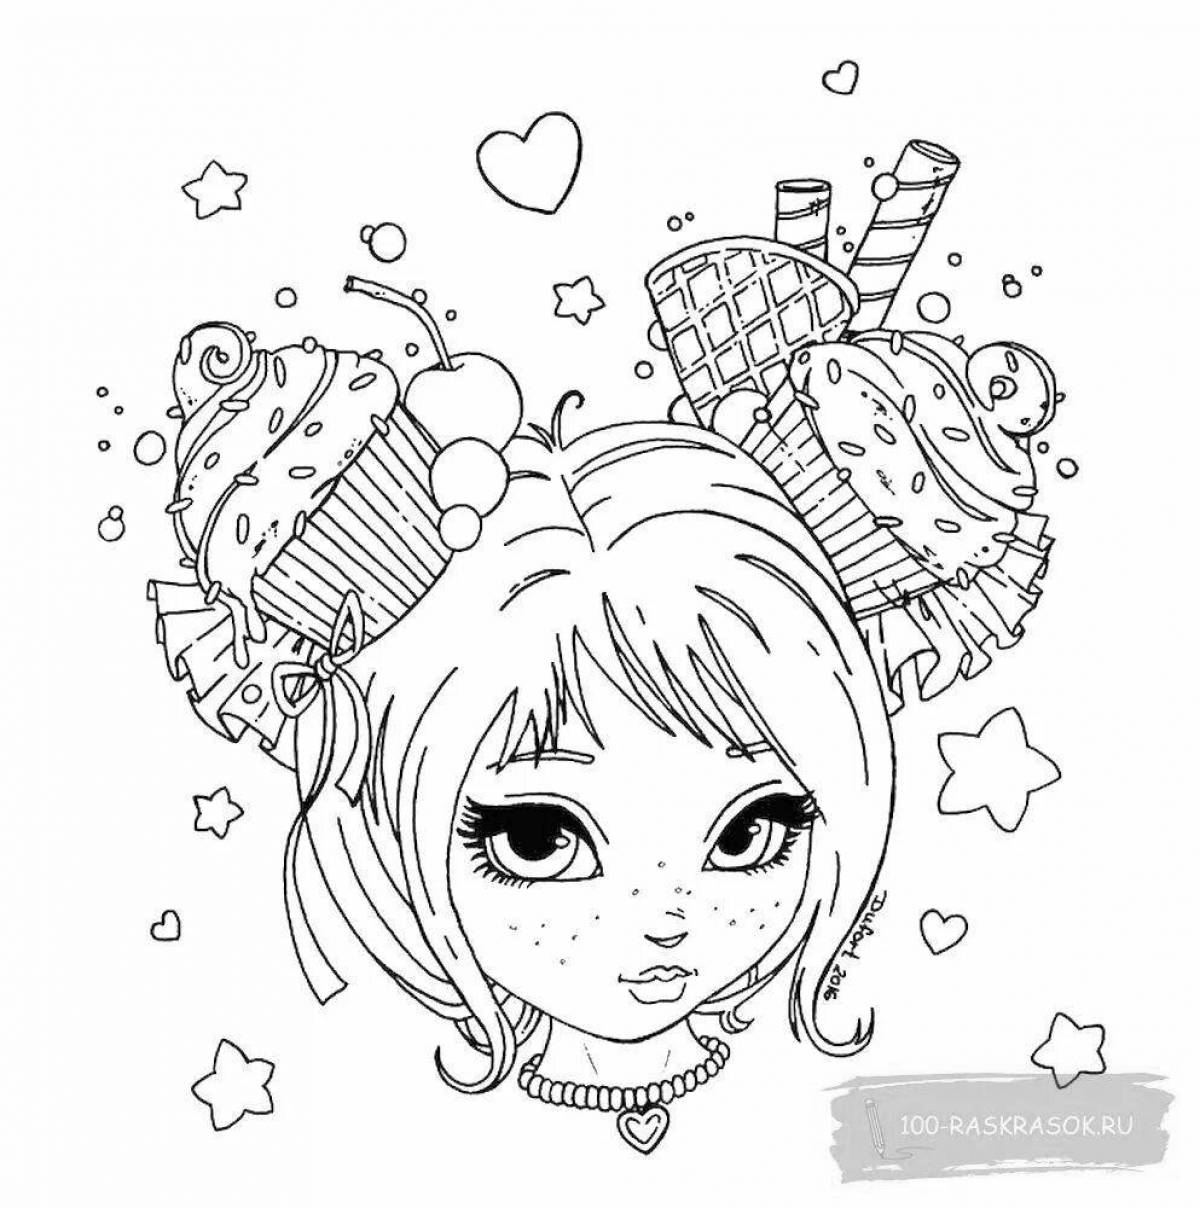 Adorable coloring book for girls funny